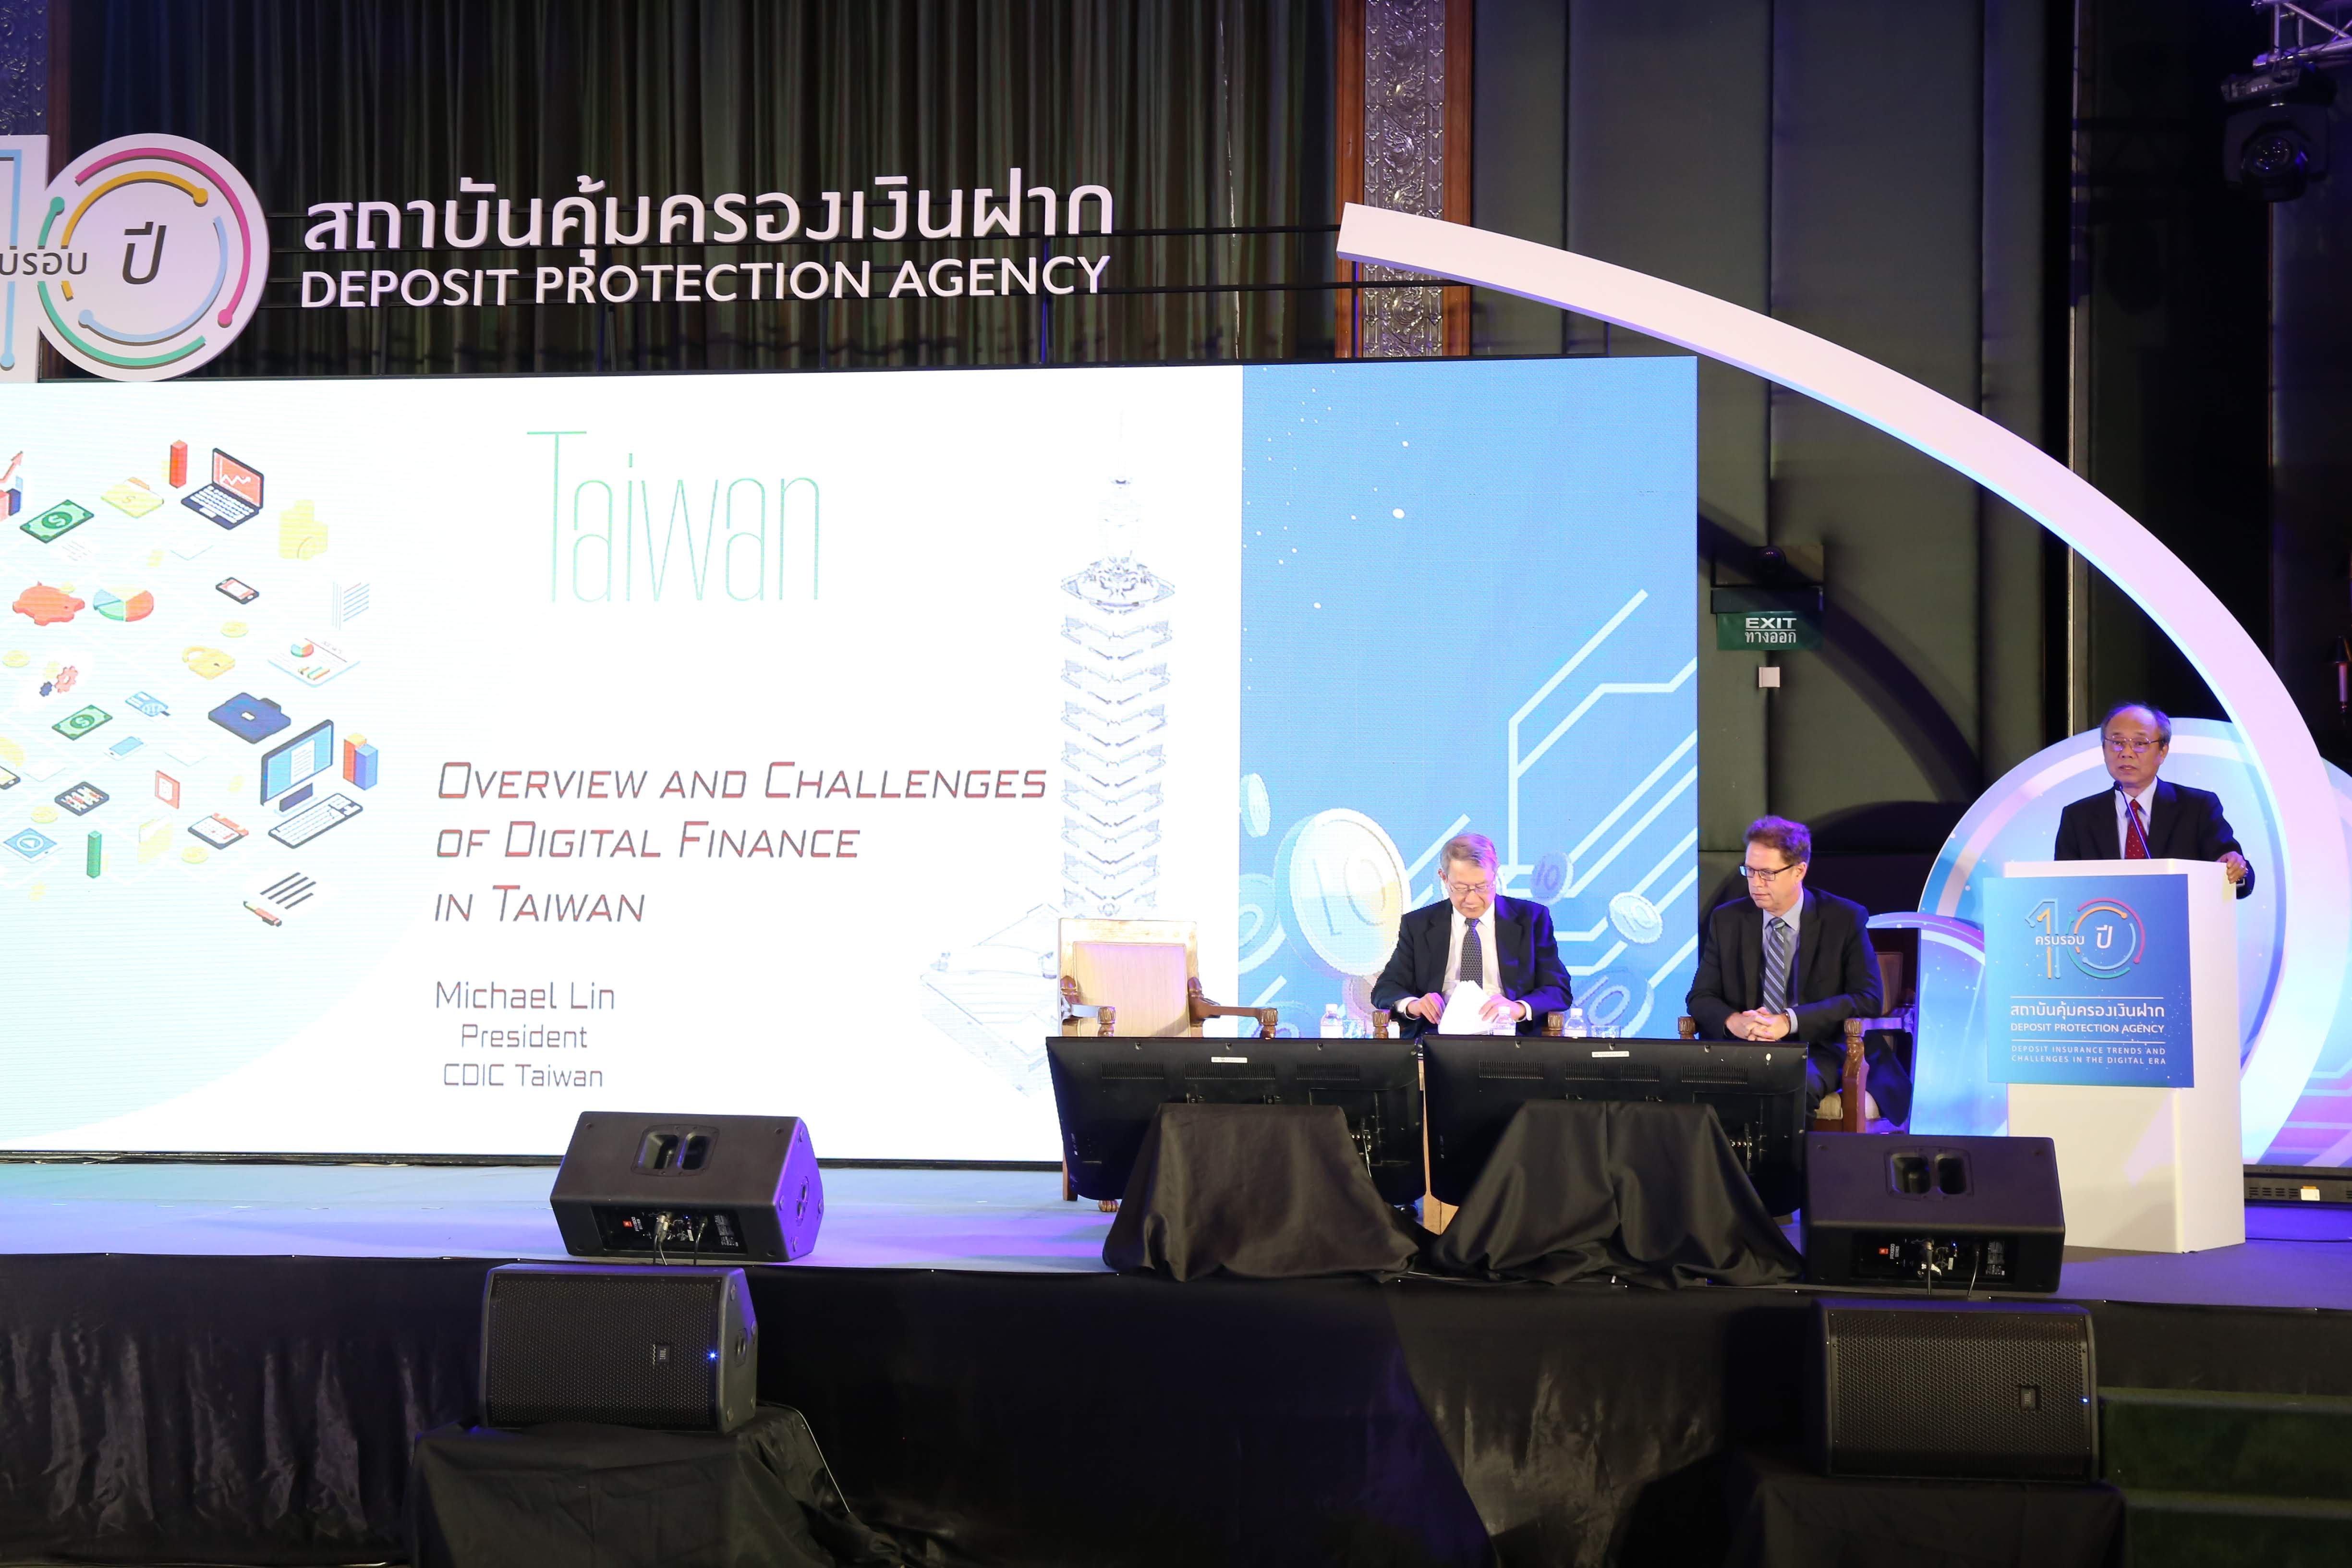 Photo of CDIC President Michael Lin (right) as a speaker of the second session “Deposit Insurance and the Digital Era: Why, How, and for Whom”of the seminar hosted by the Deposit Protection Agency, Thailand.